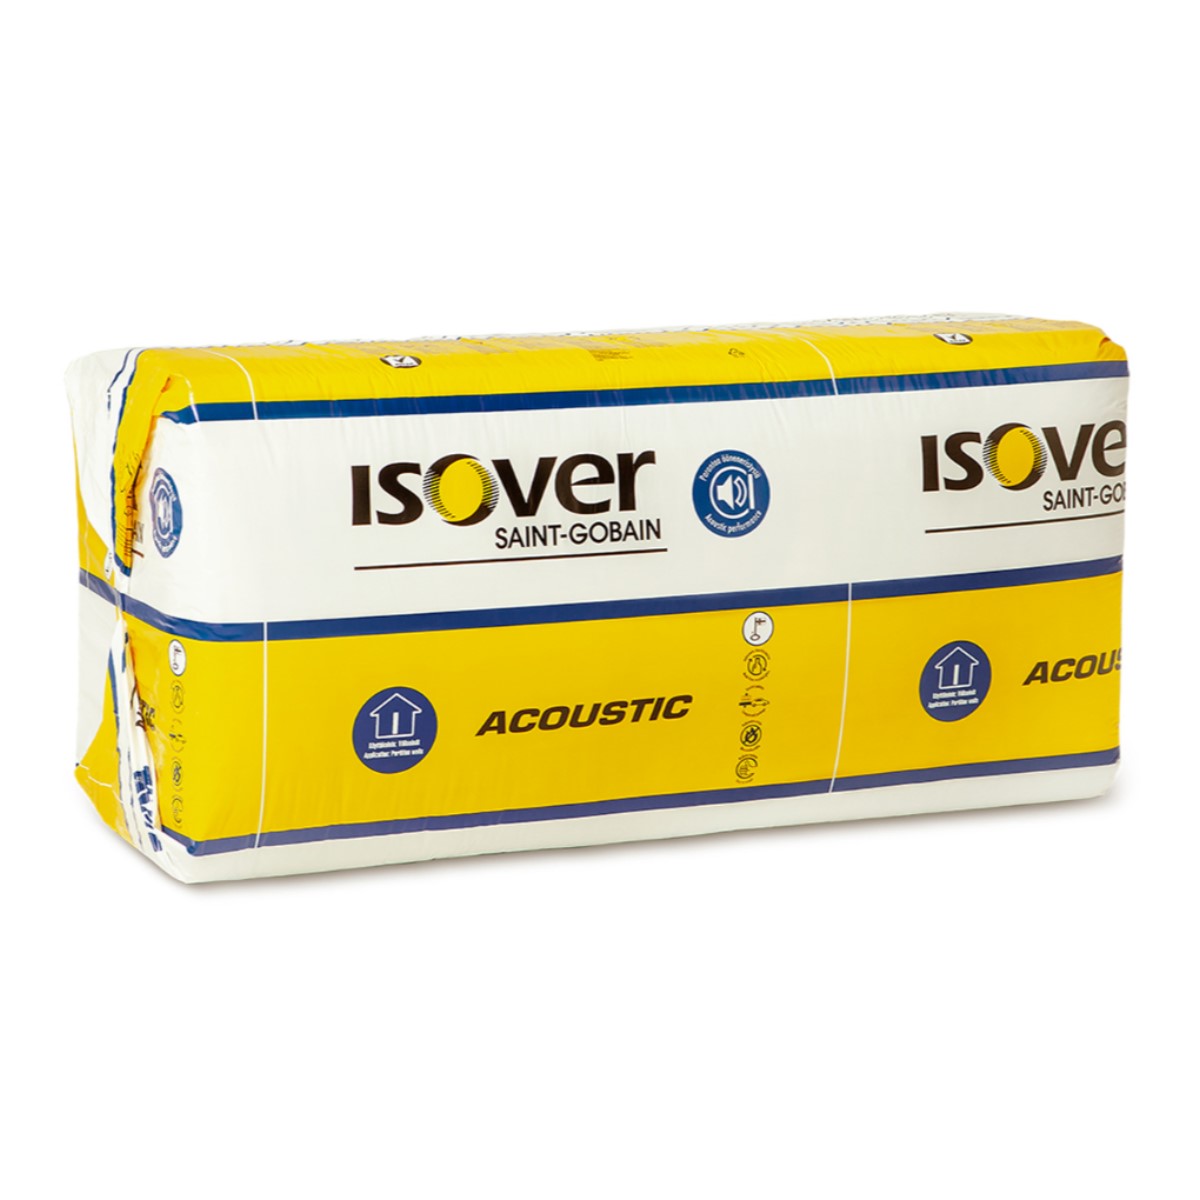 ISOVER ACOUSTIC 610x1310mm 50mm (15.98m2)